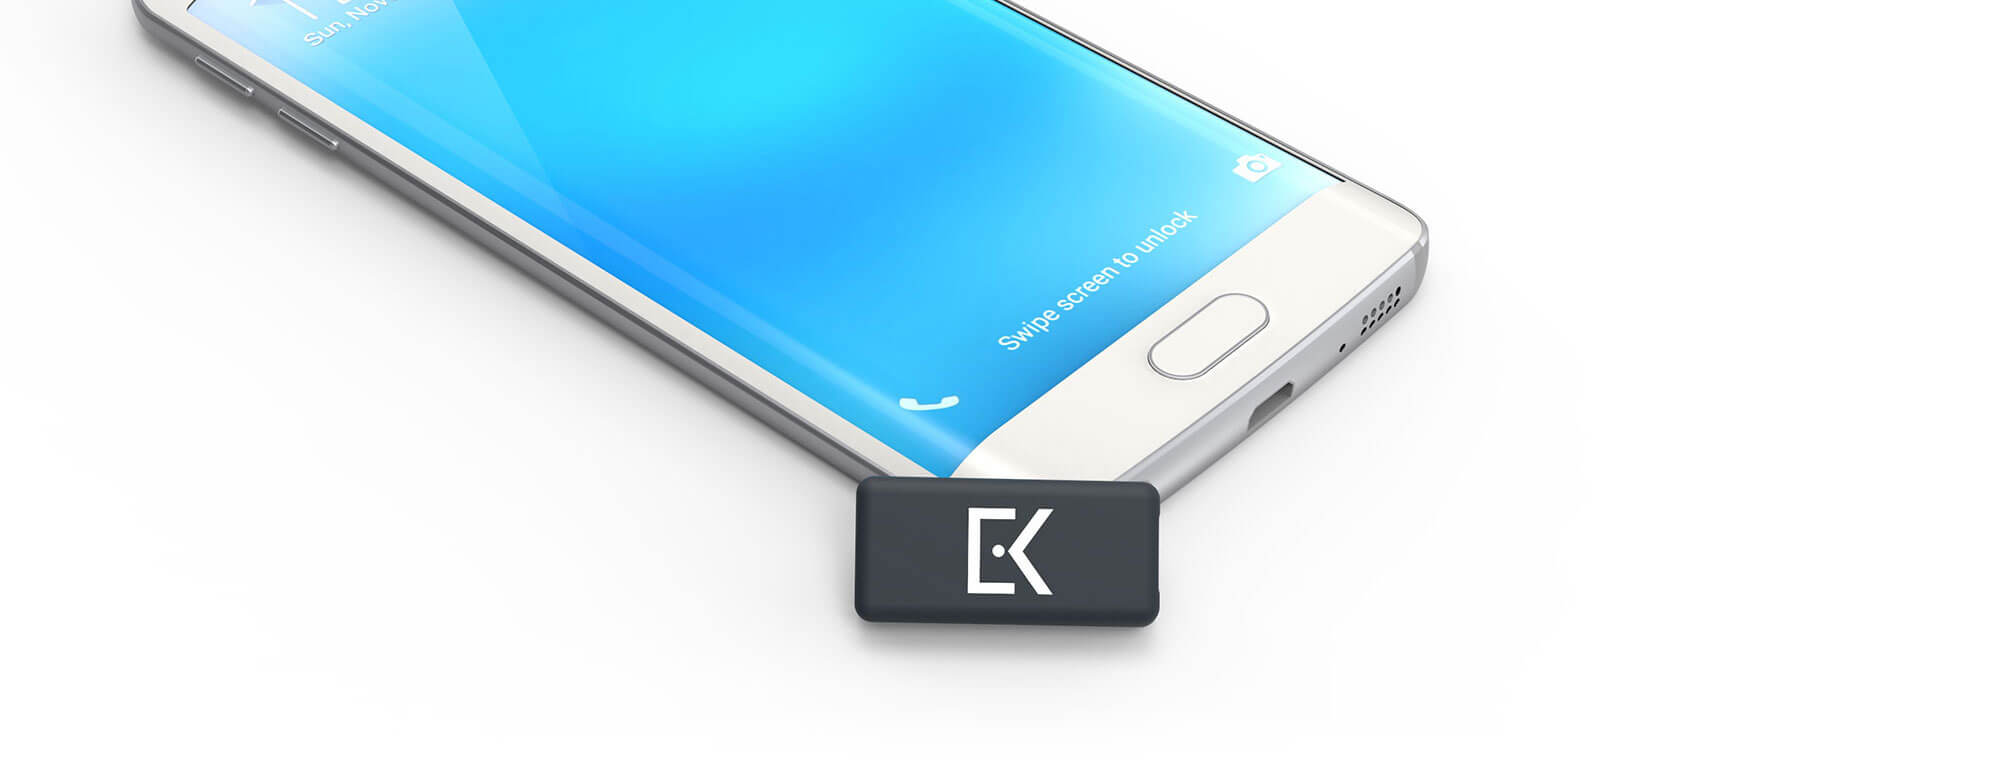 Everykey password device in front of mobile phone